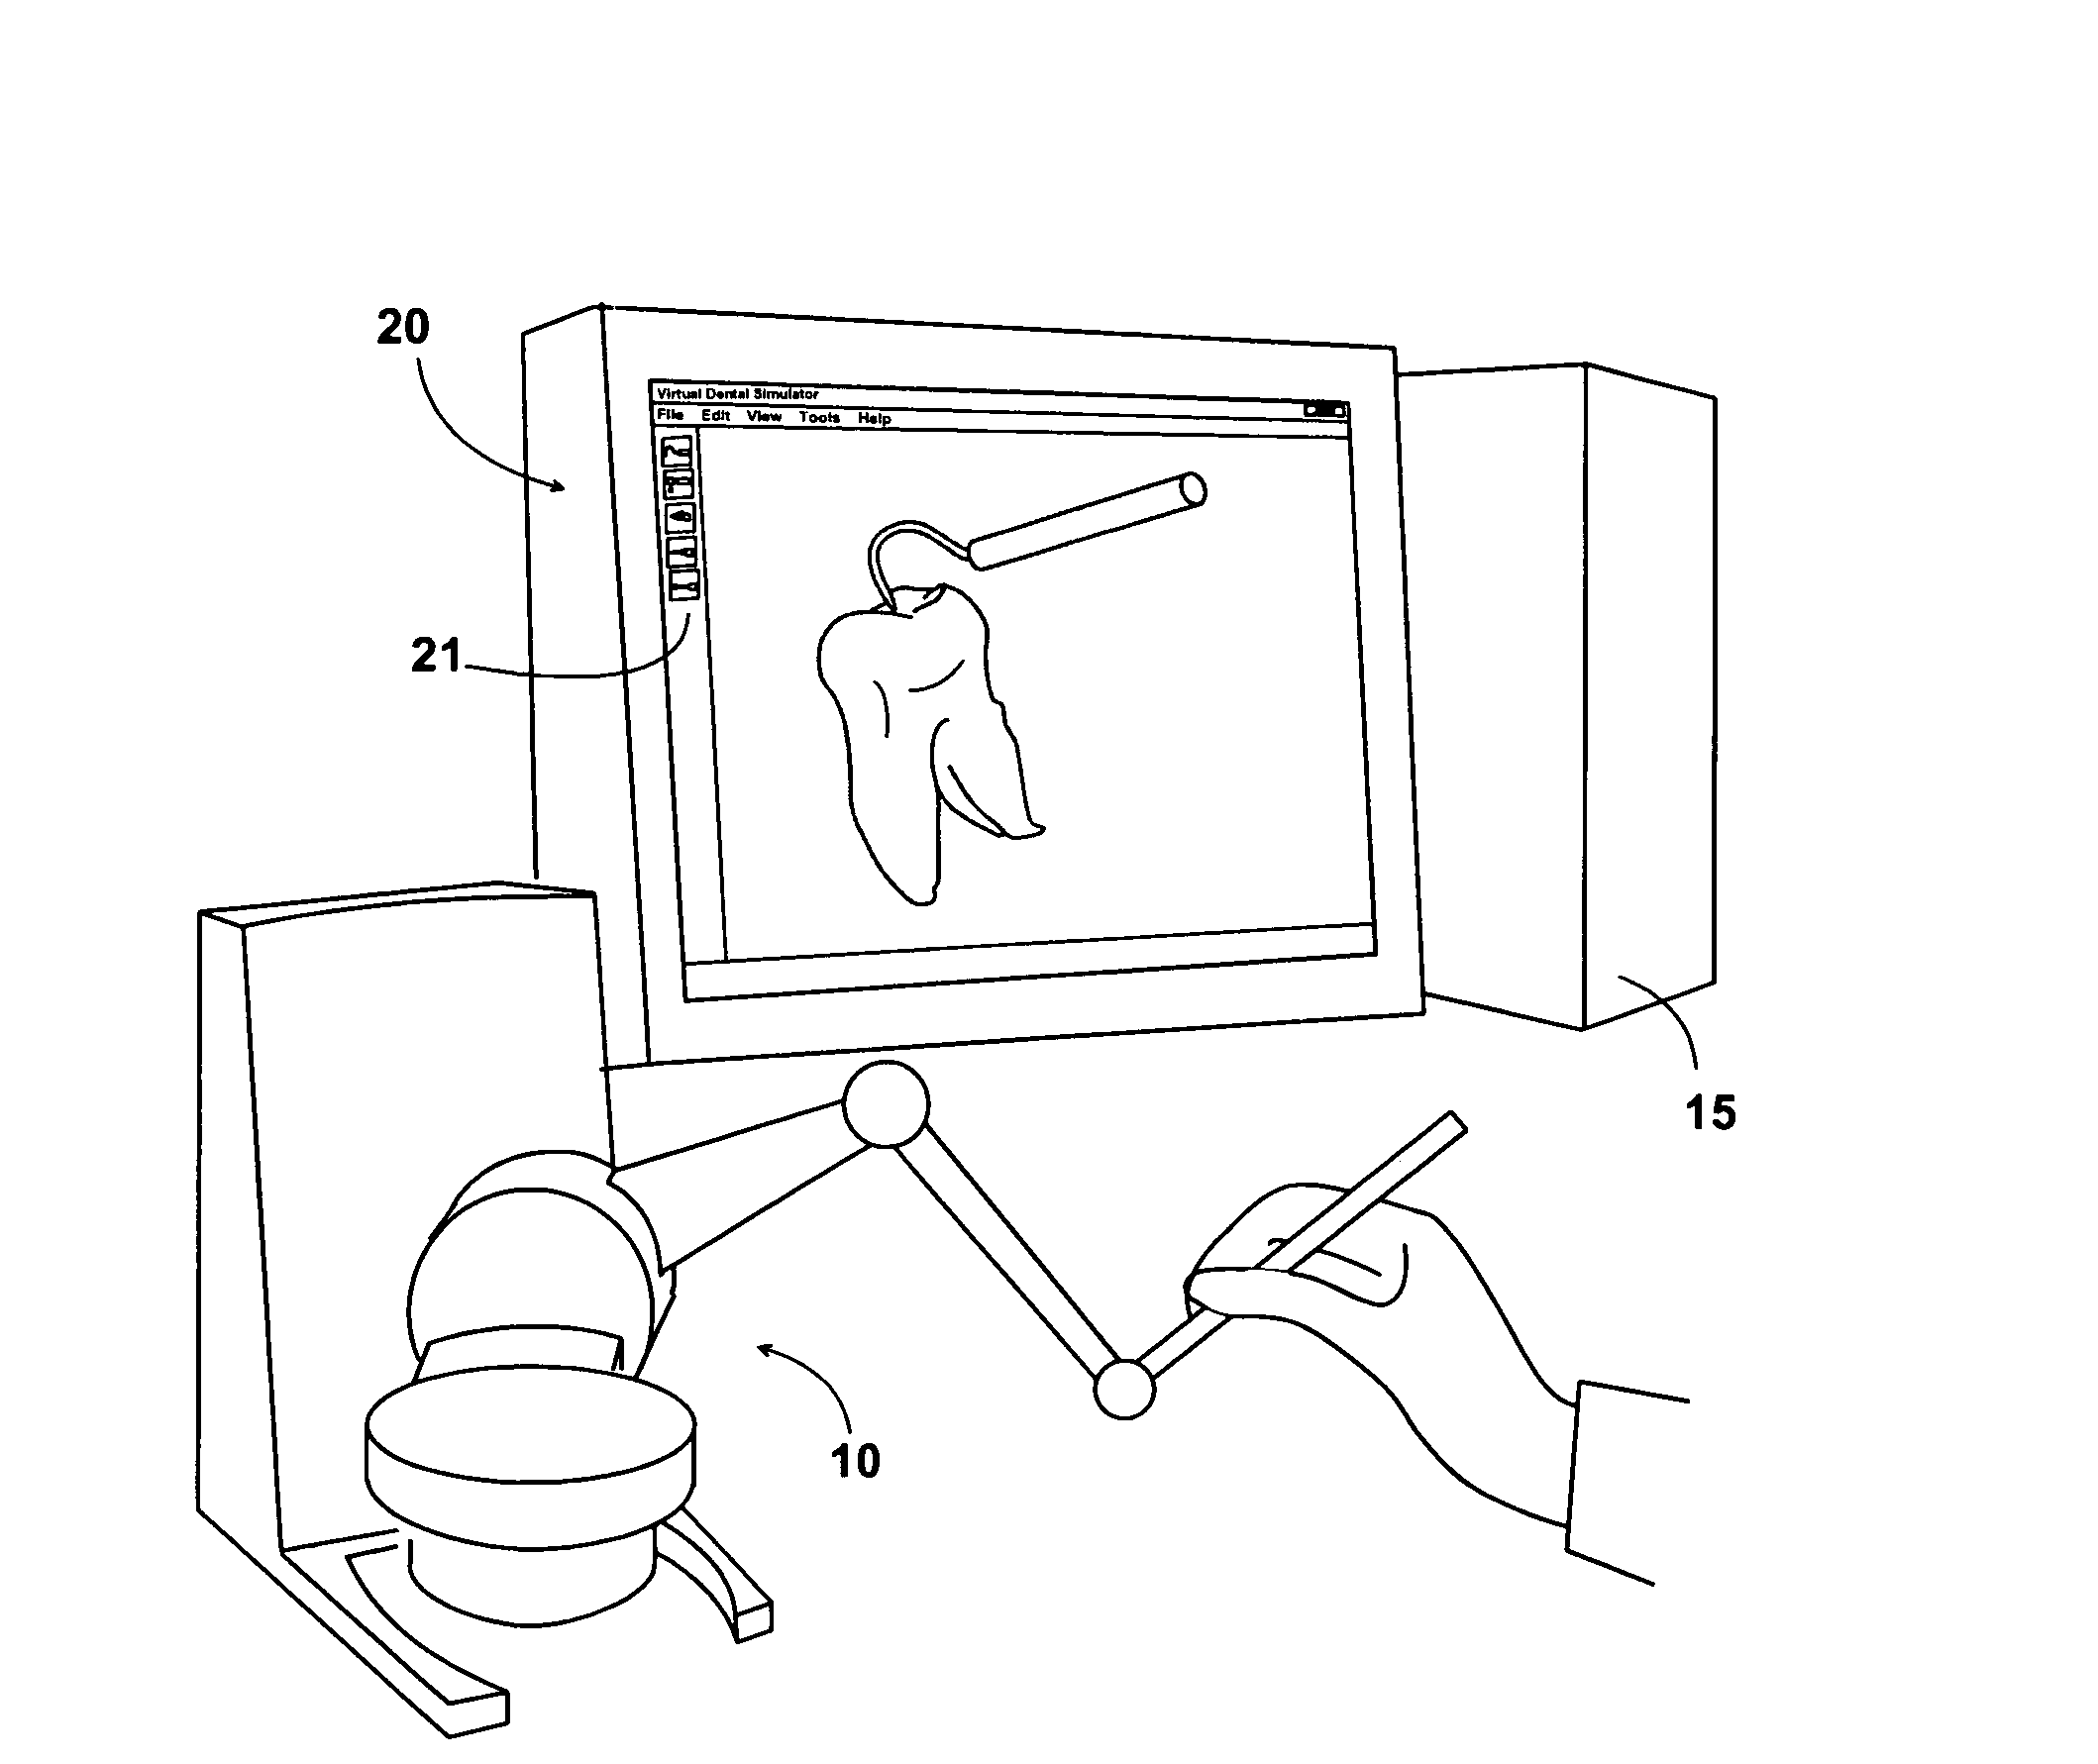 Methods and apparatus for simulating dental procedures and for training dental students